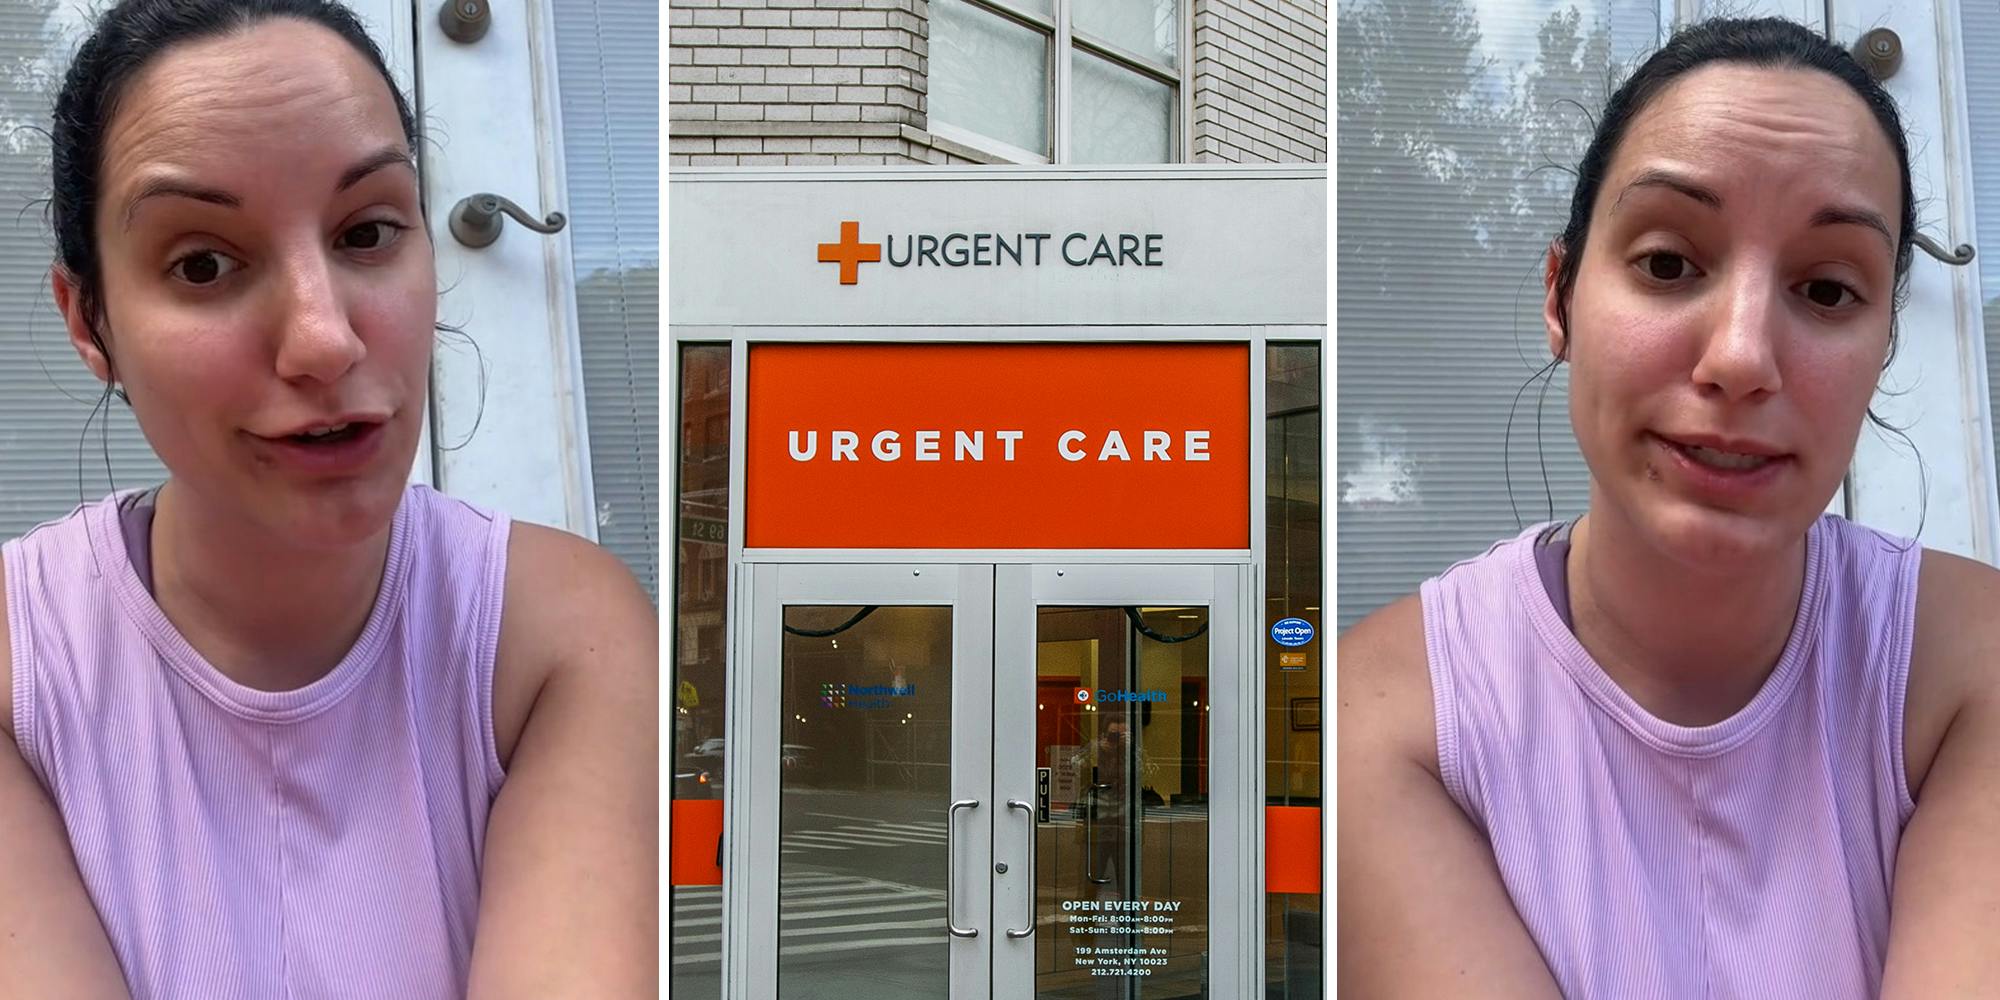 10-year nurse issues warning about going to urgent care